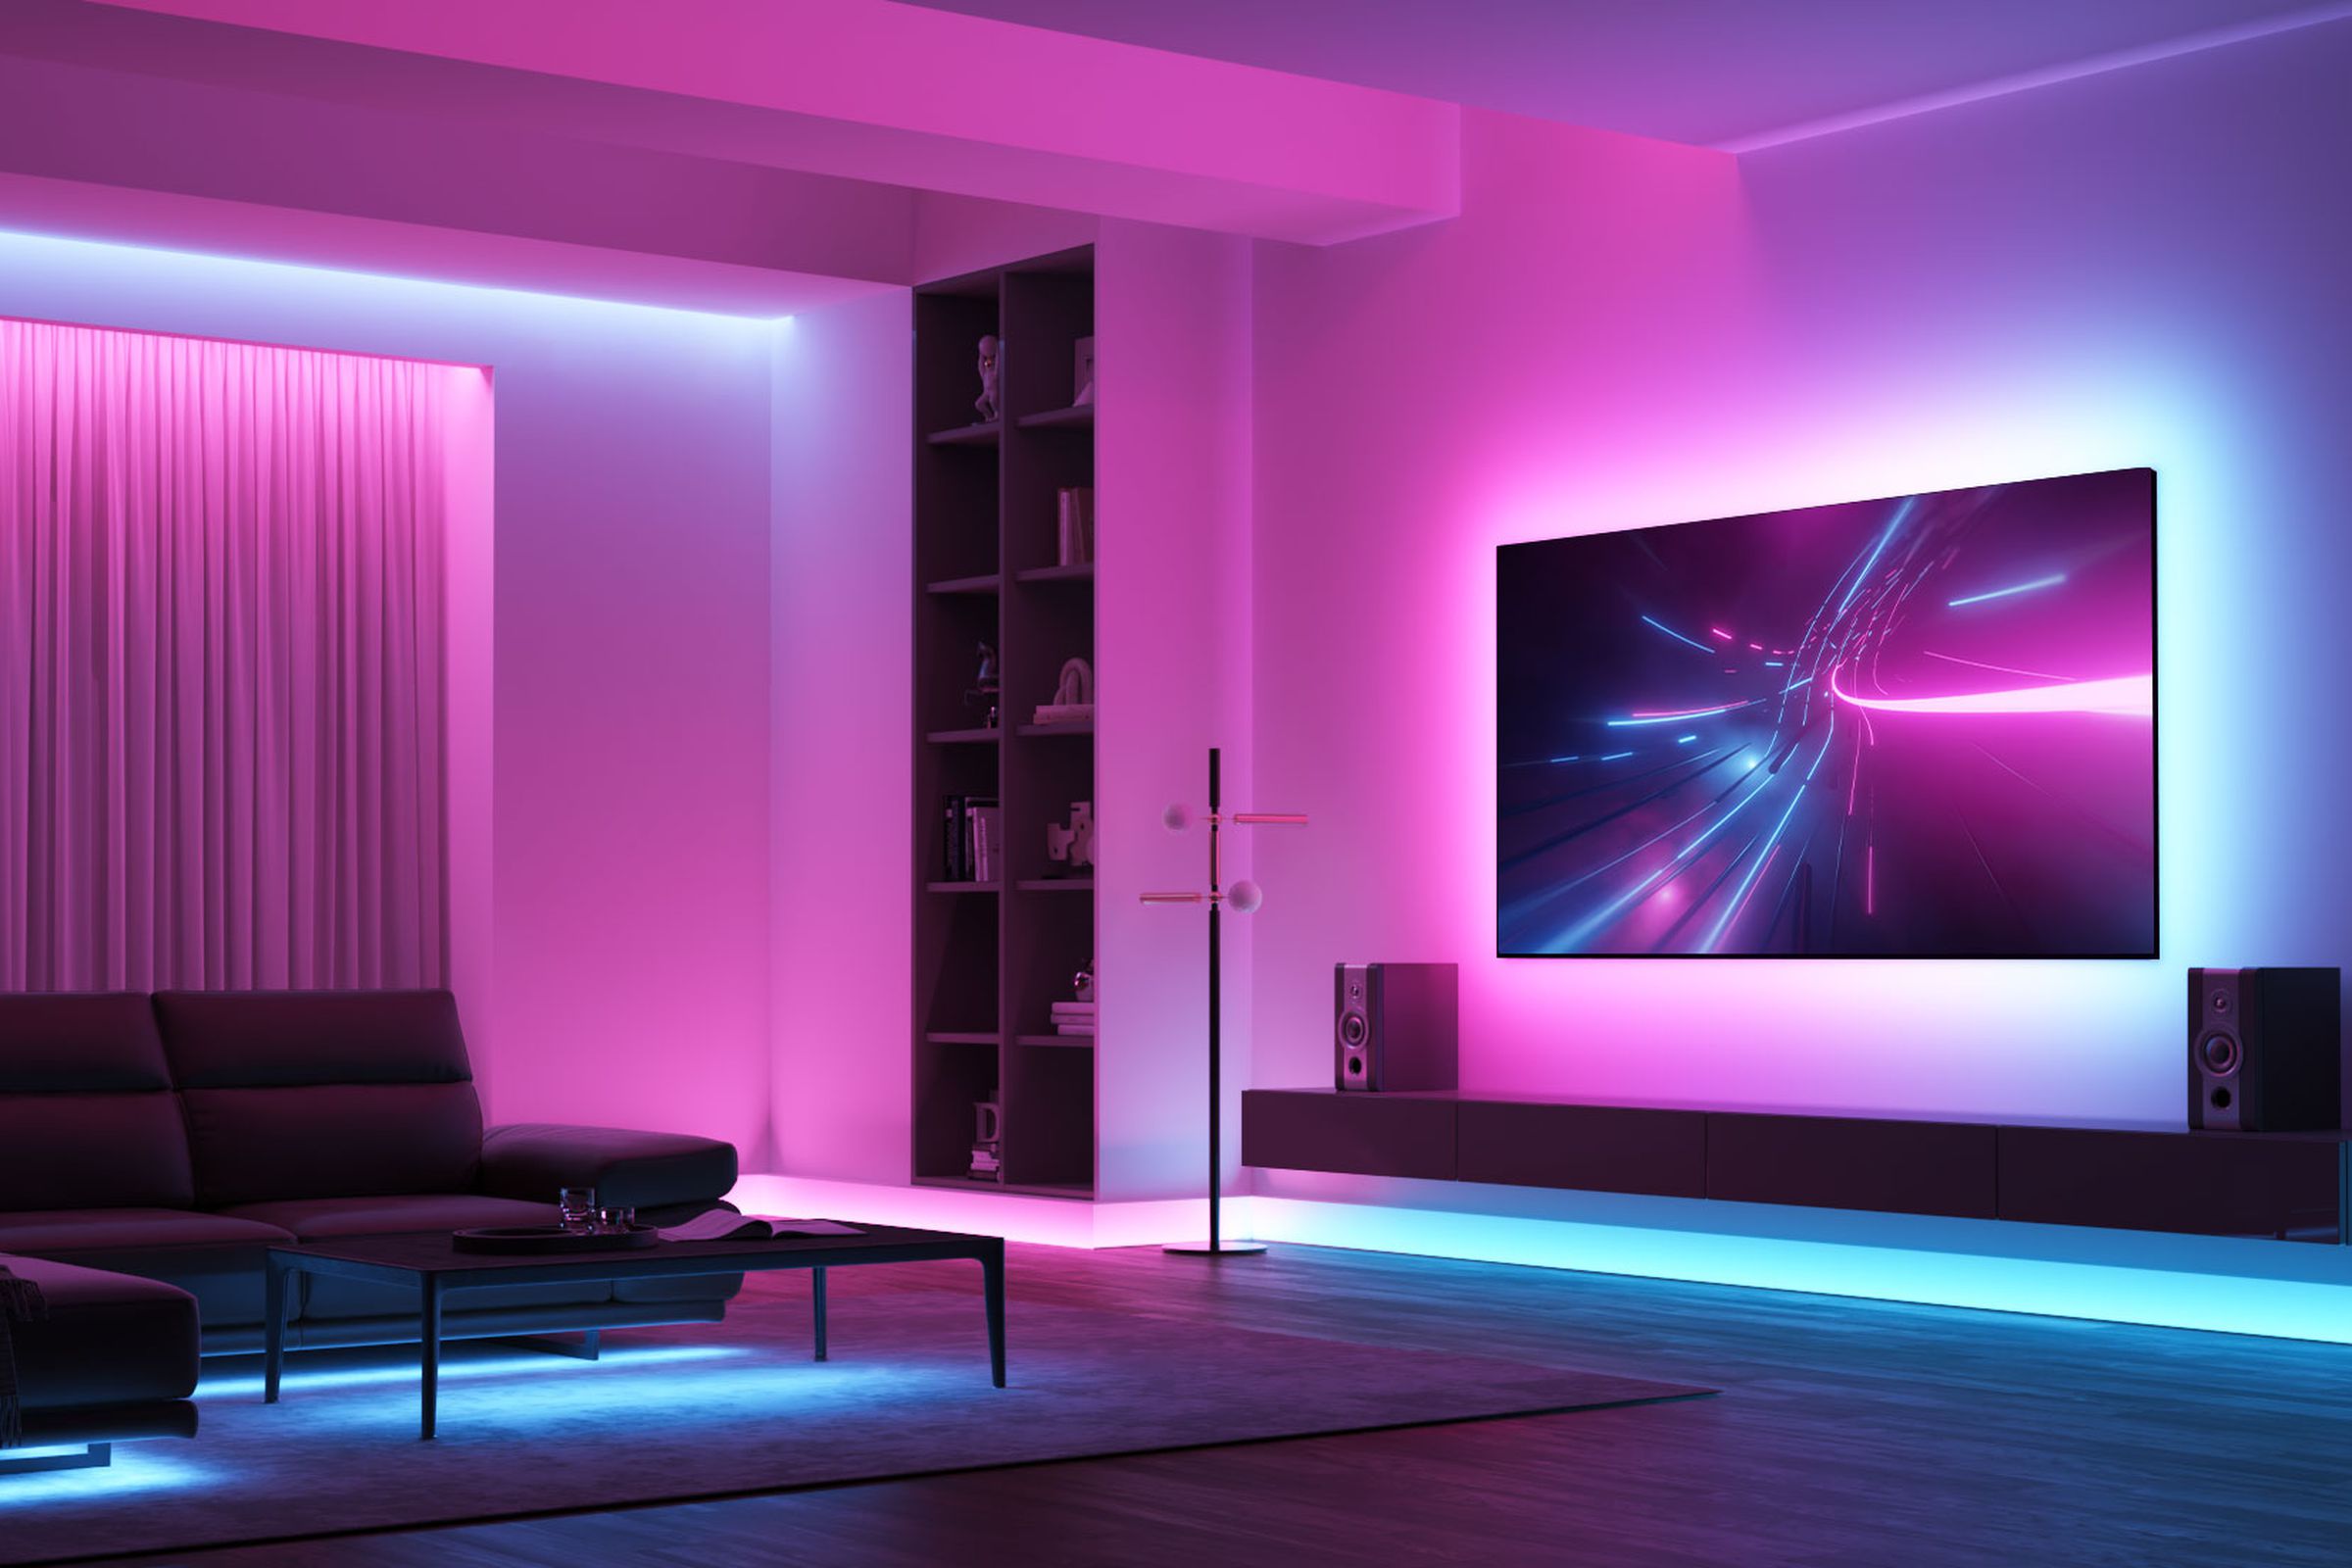 The Govee M1 LED strip can be tucked away unobtrusively for accent lighting around a room.